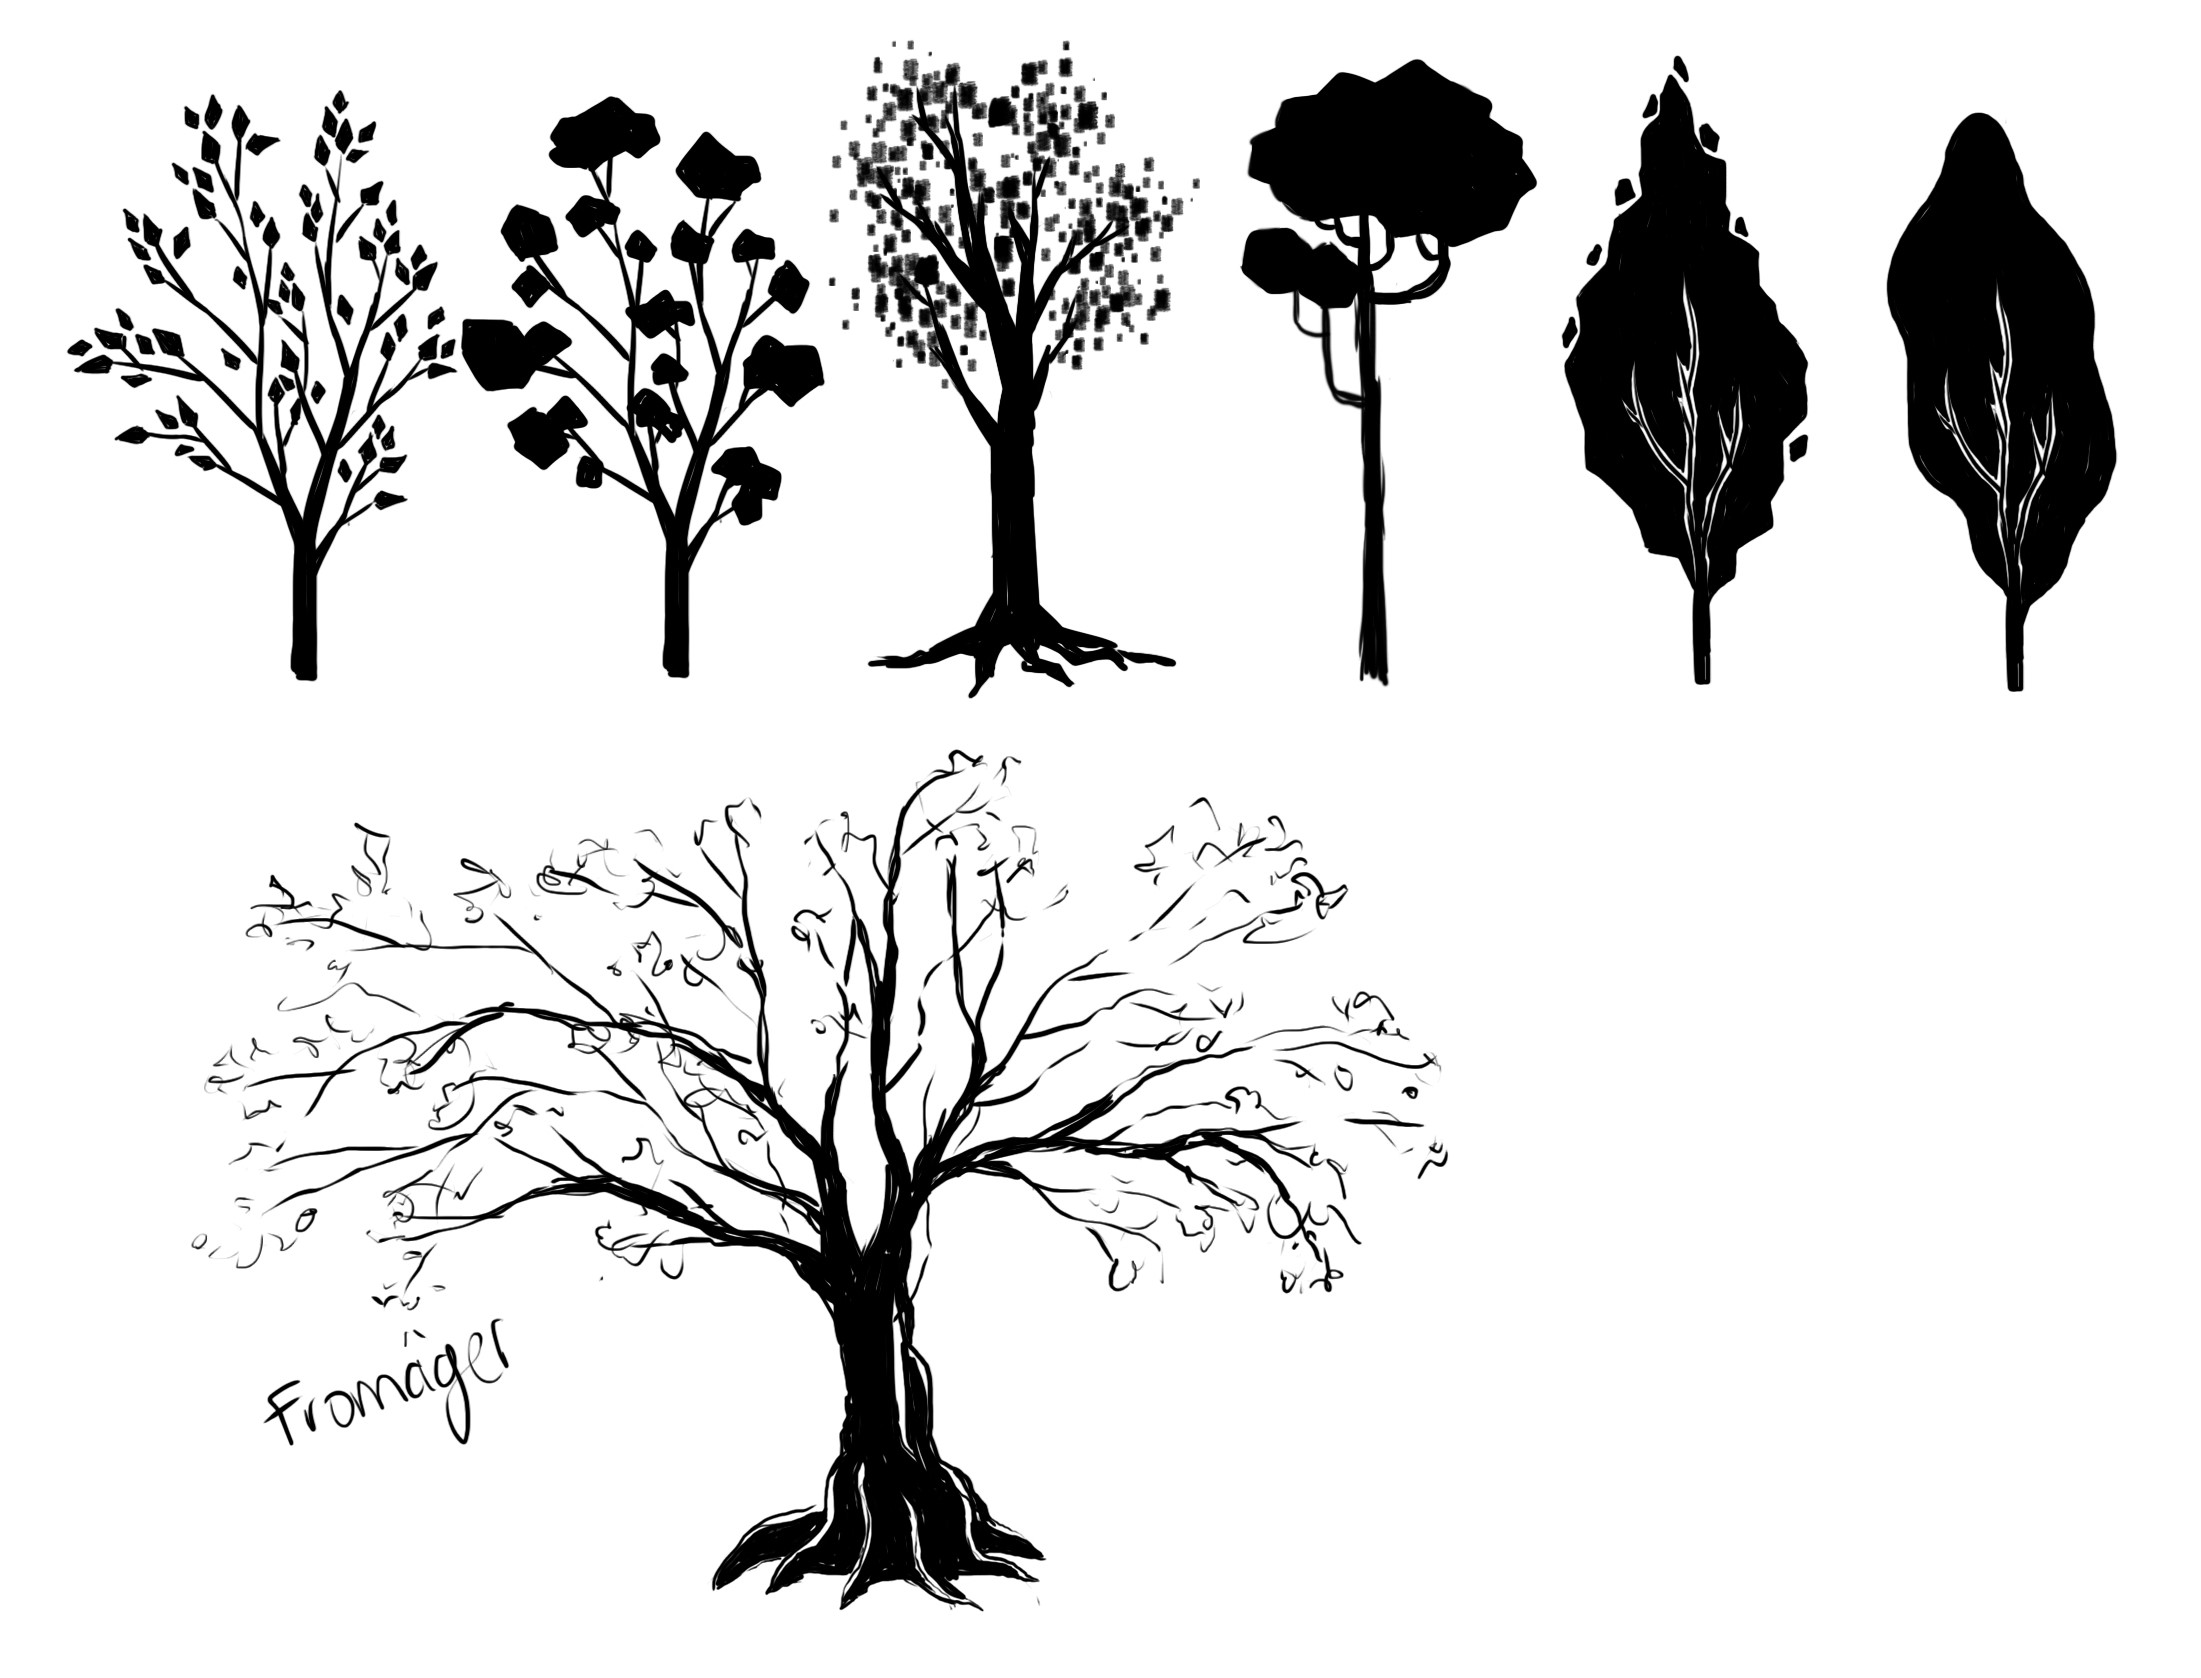 Tree silhouette search for environment, draw by Betty Natale 